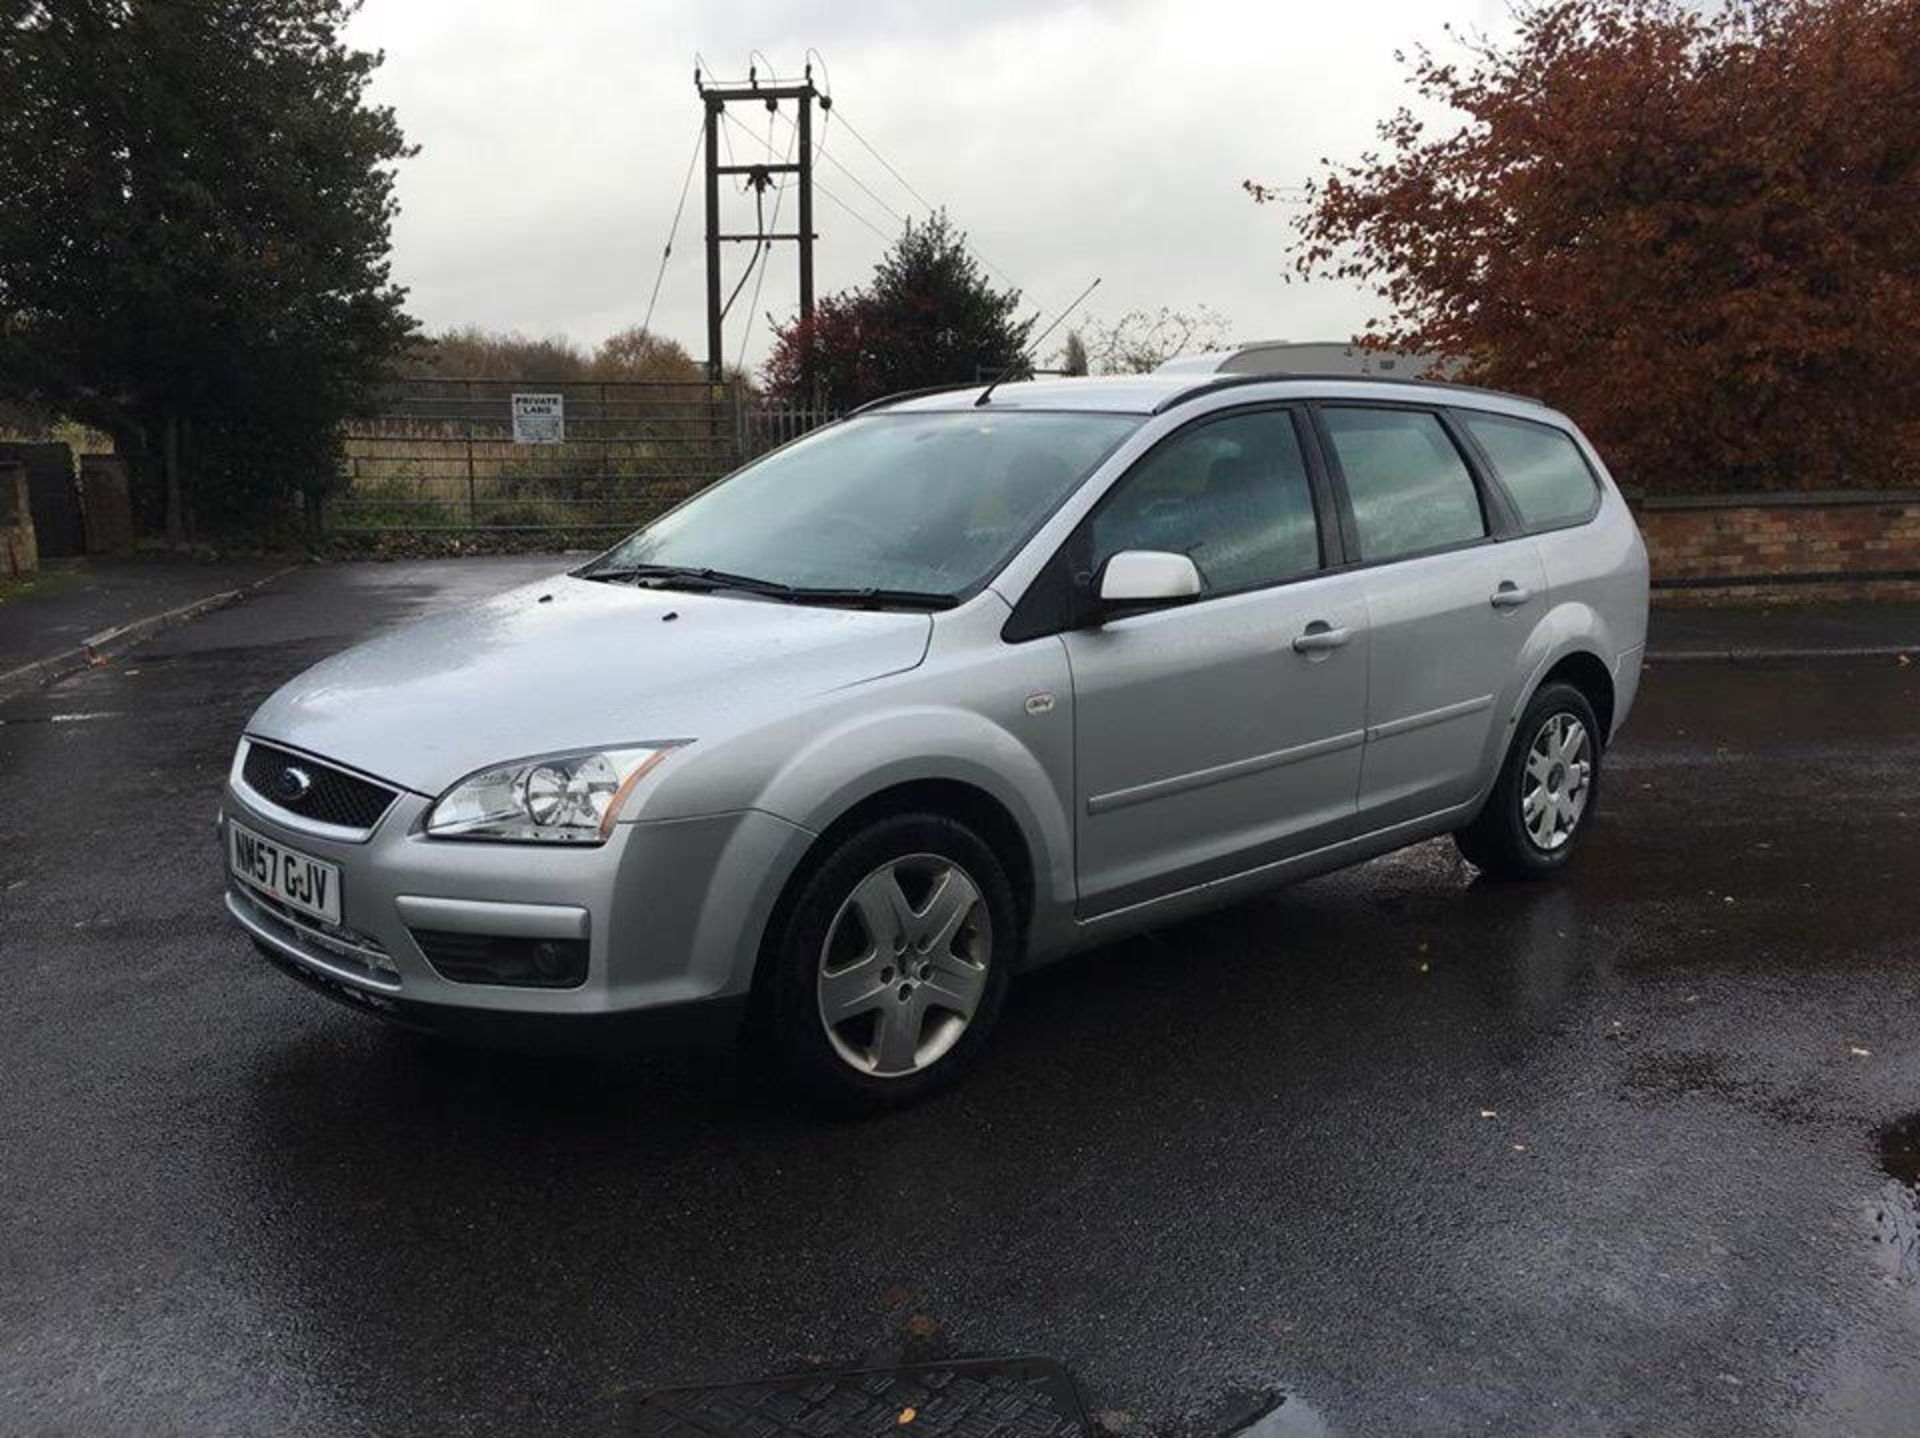 2008/57 PLATE FORD FOCUS 1.6 PETROL STYLE ESTATE, 91K MILES. MOT JULY 2017. - Image 6 of 12